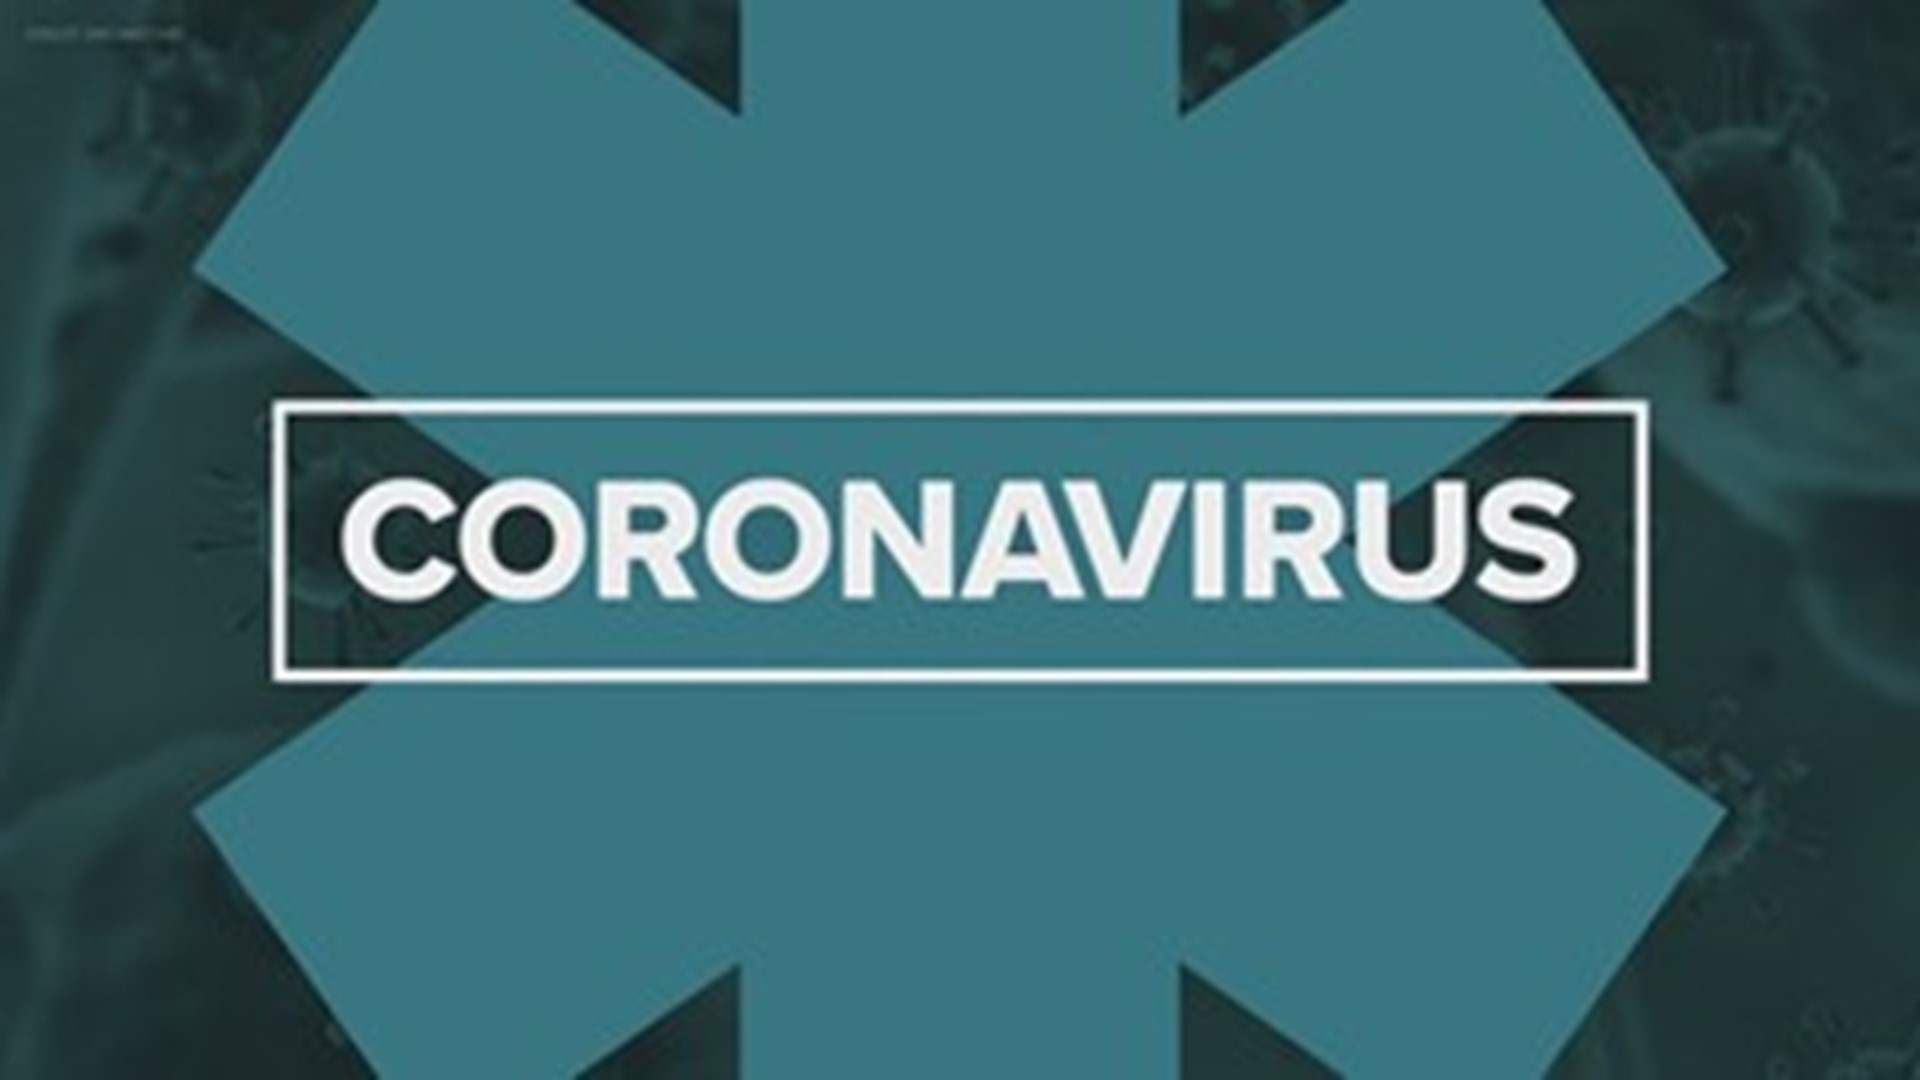 Coronavirus cases continue to rise in Indiana this weekend. As of today, the state department of health reports nearly 7,000 new cases of COVID-19.